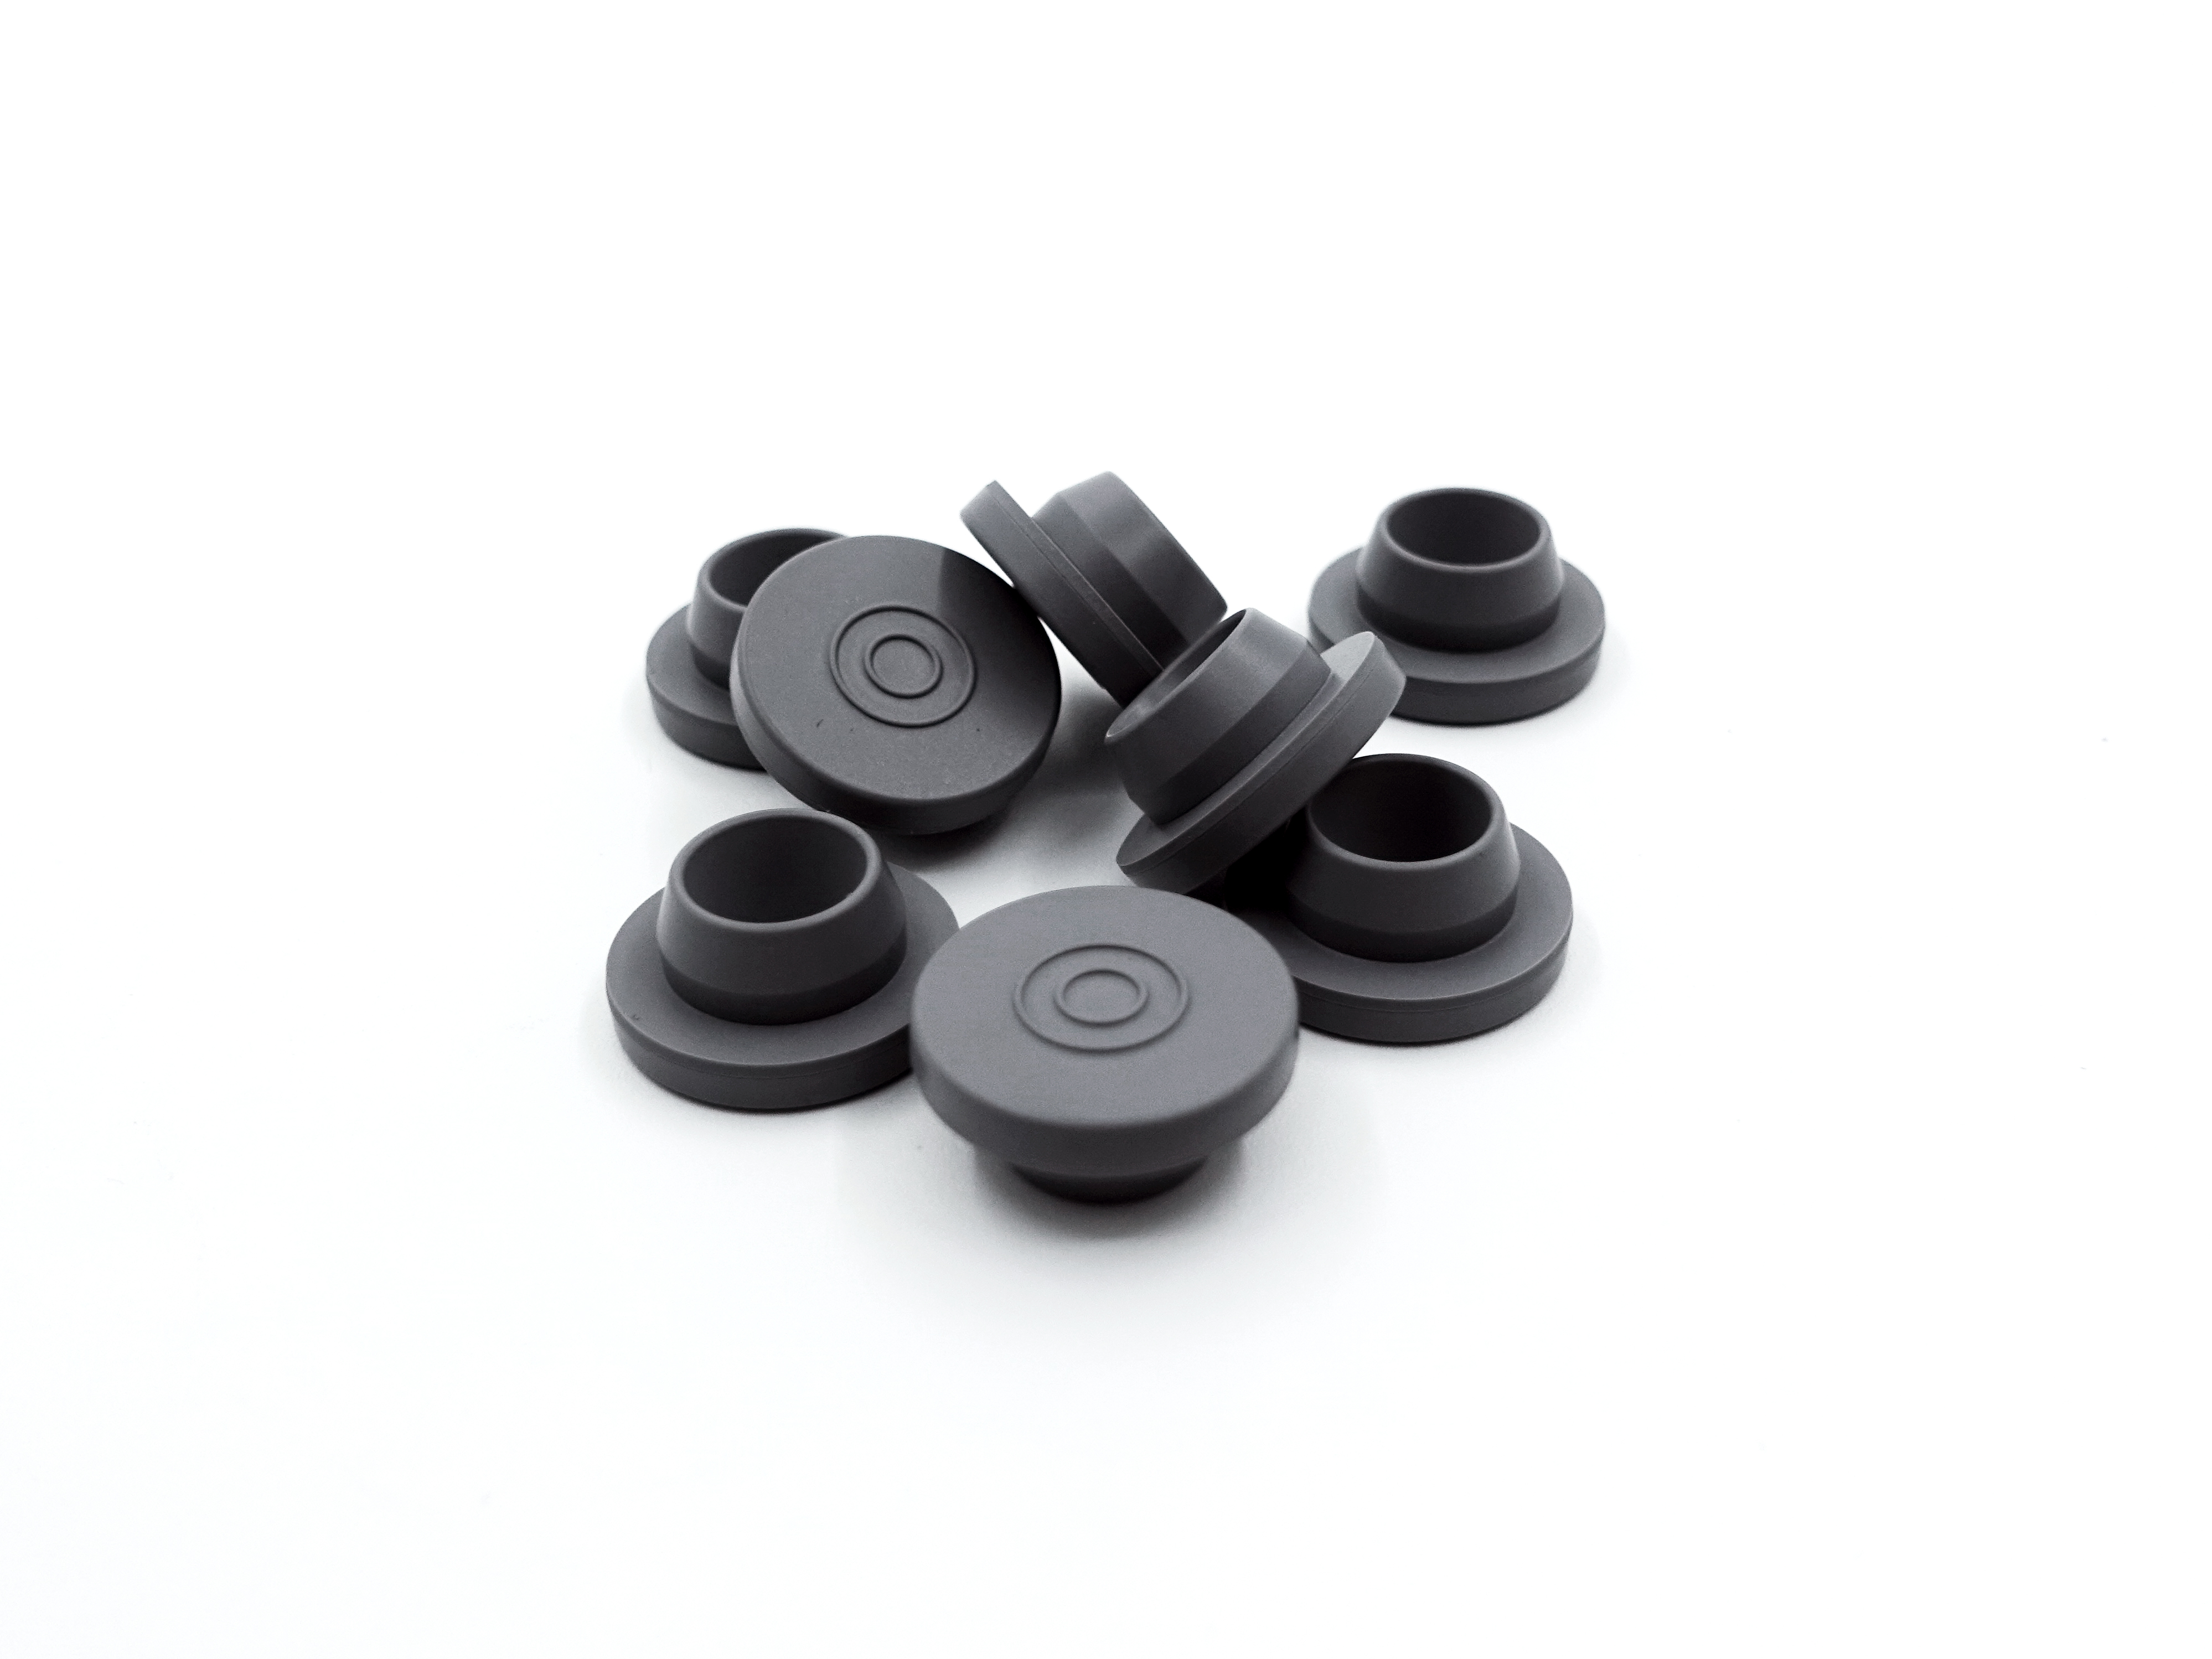 Brominated butyl rubber seals